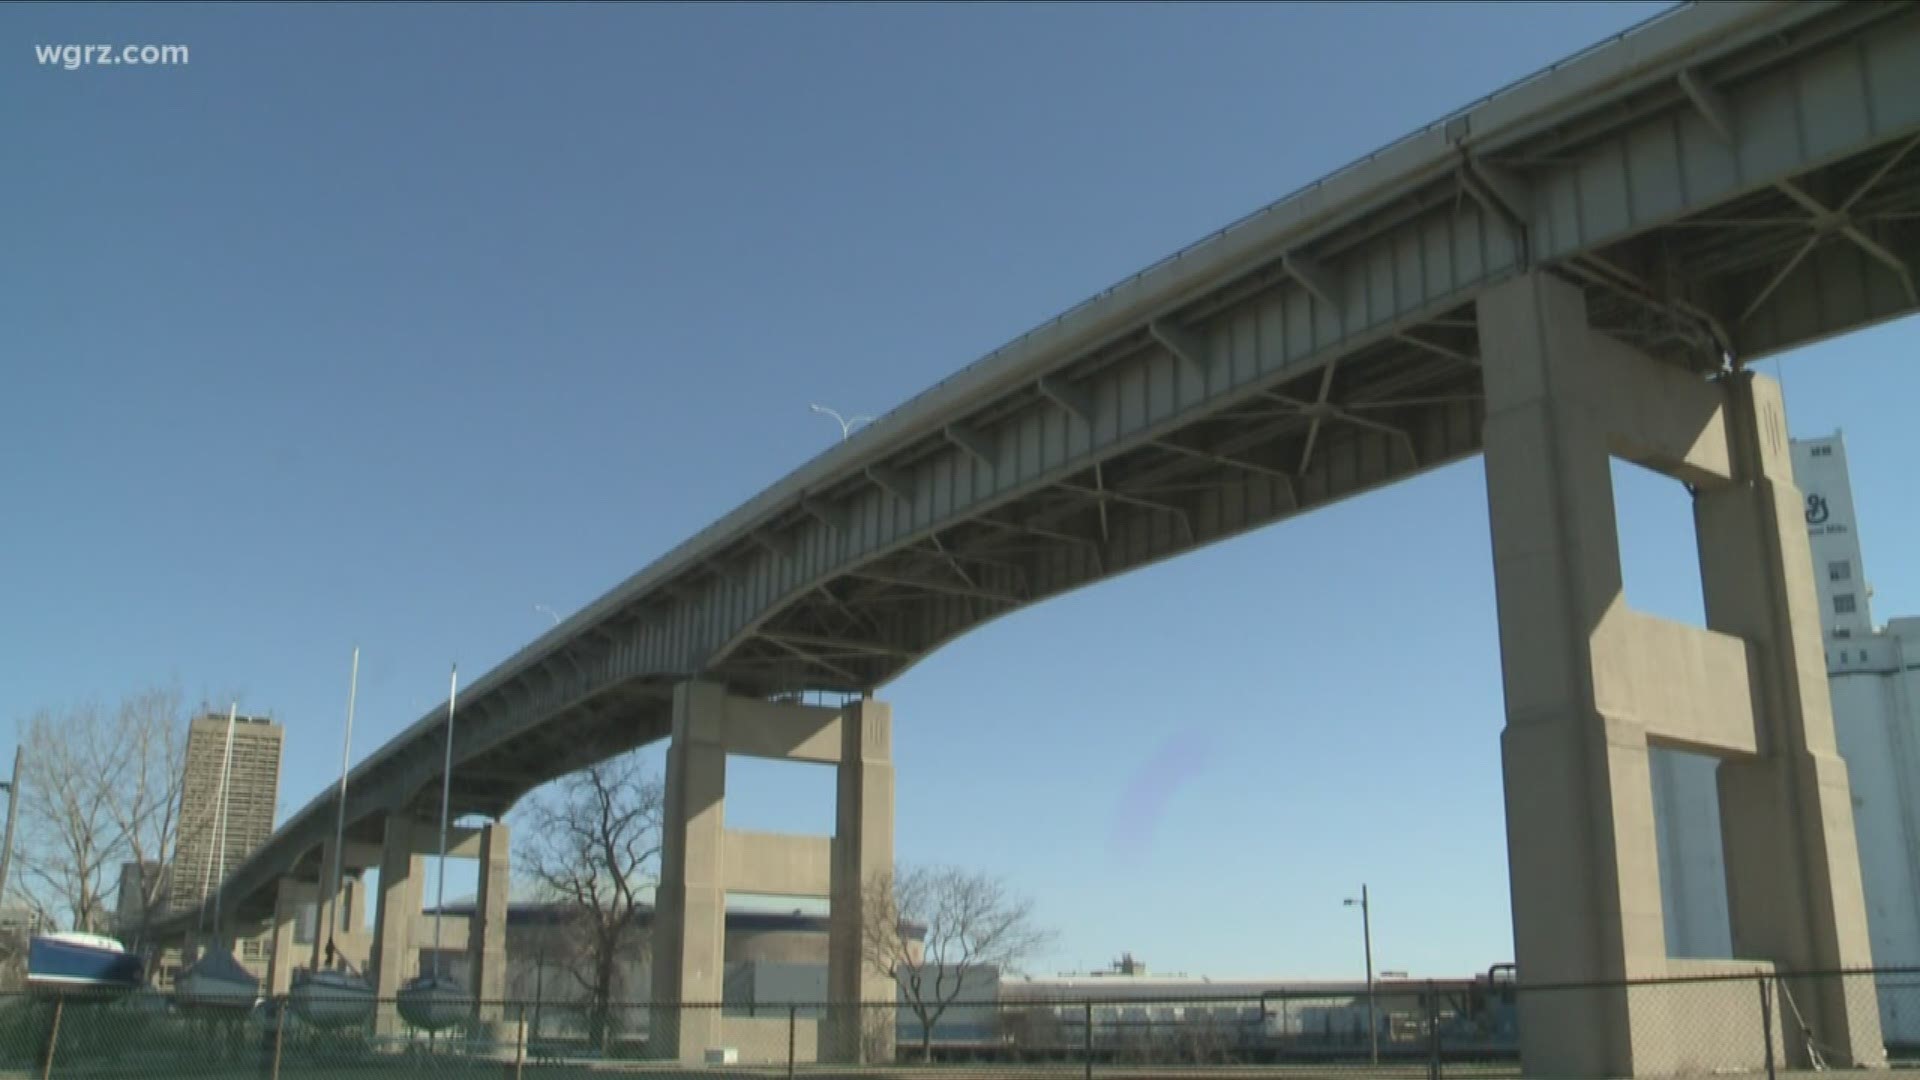 The future of the skyway is still unclear